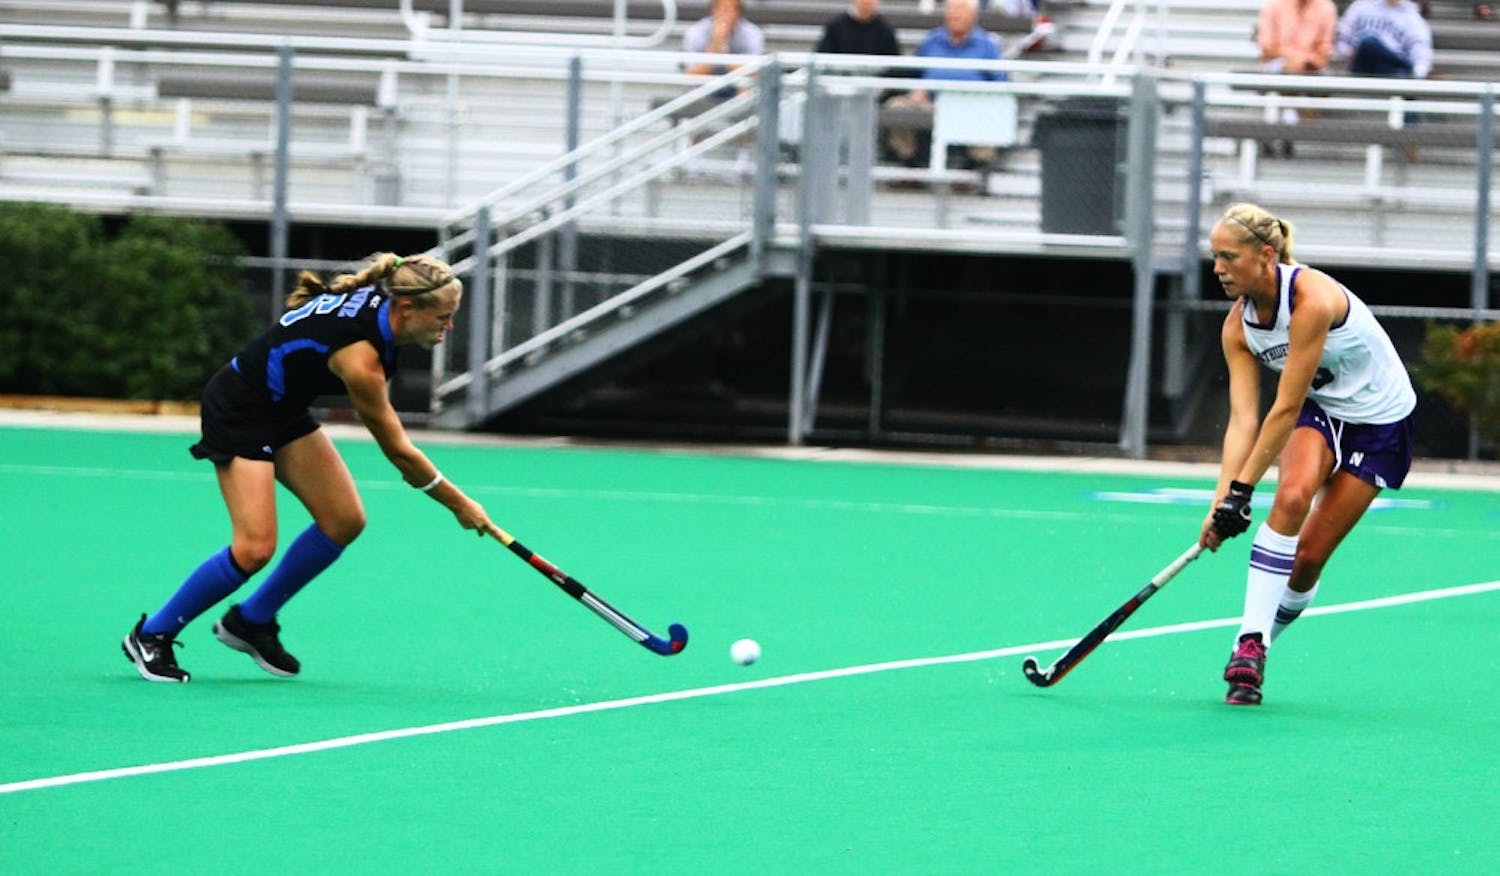 Duke had scored a string of late goals to clinch victories recently, but it was a late goal by Northwestern that sent the Blue Devils home with a loss.